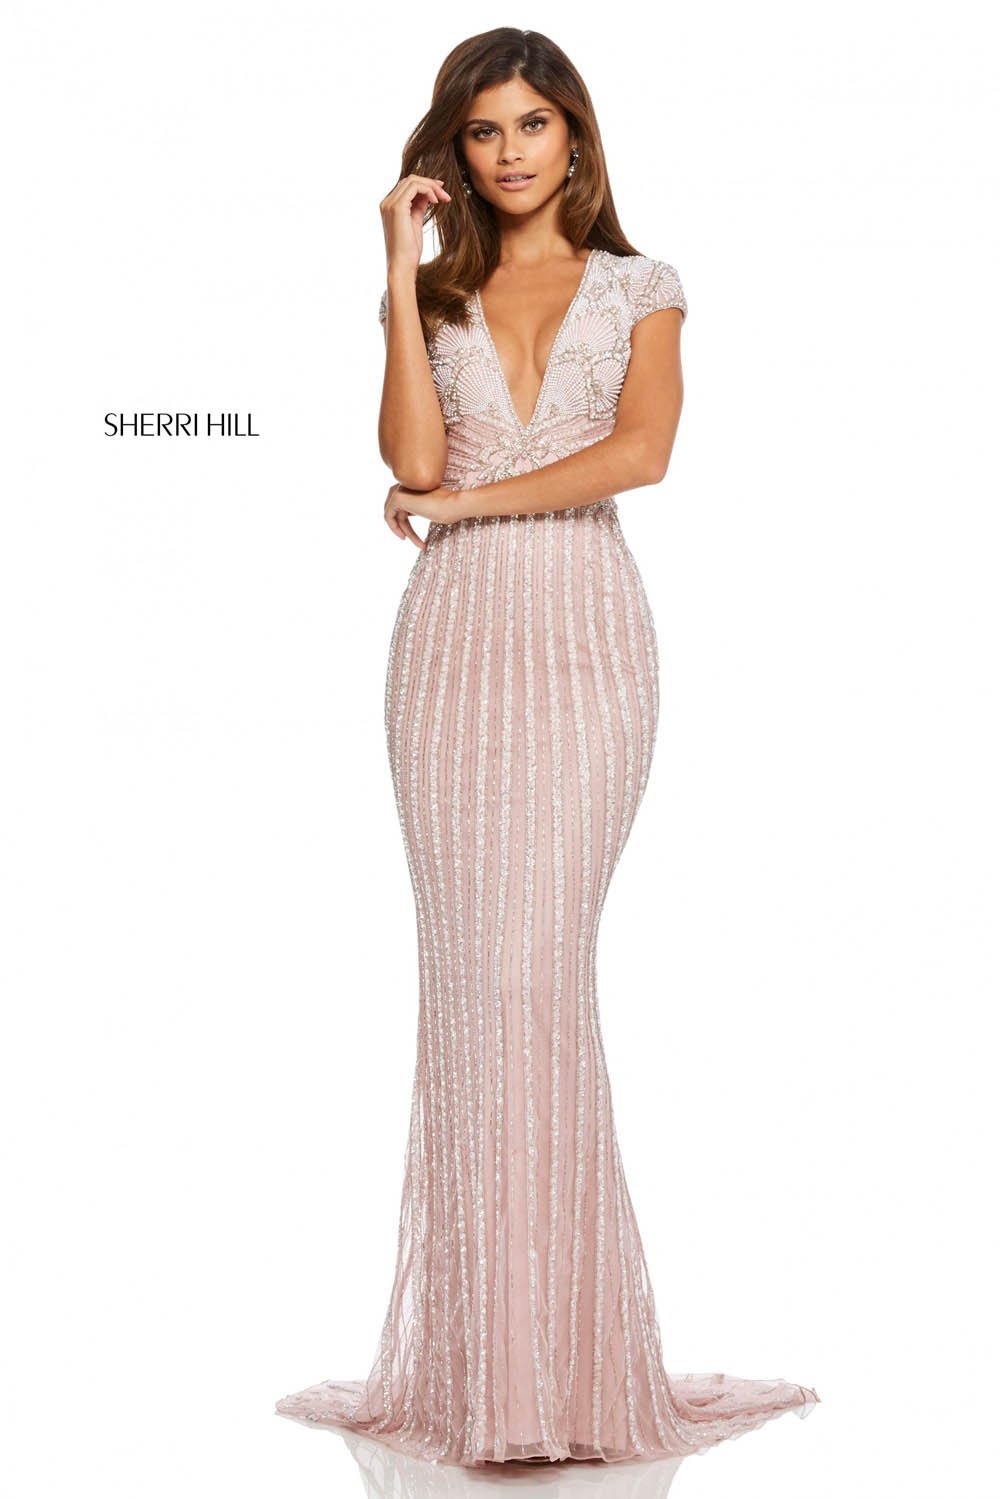 Sherri Hill 52685 dress images in these colors: Pink Silver Ivory, Light Blue Silver, Ivory Silver, Nude Silver.